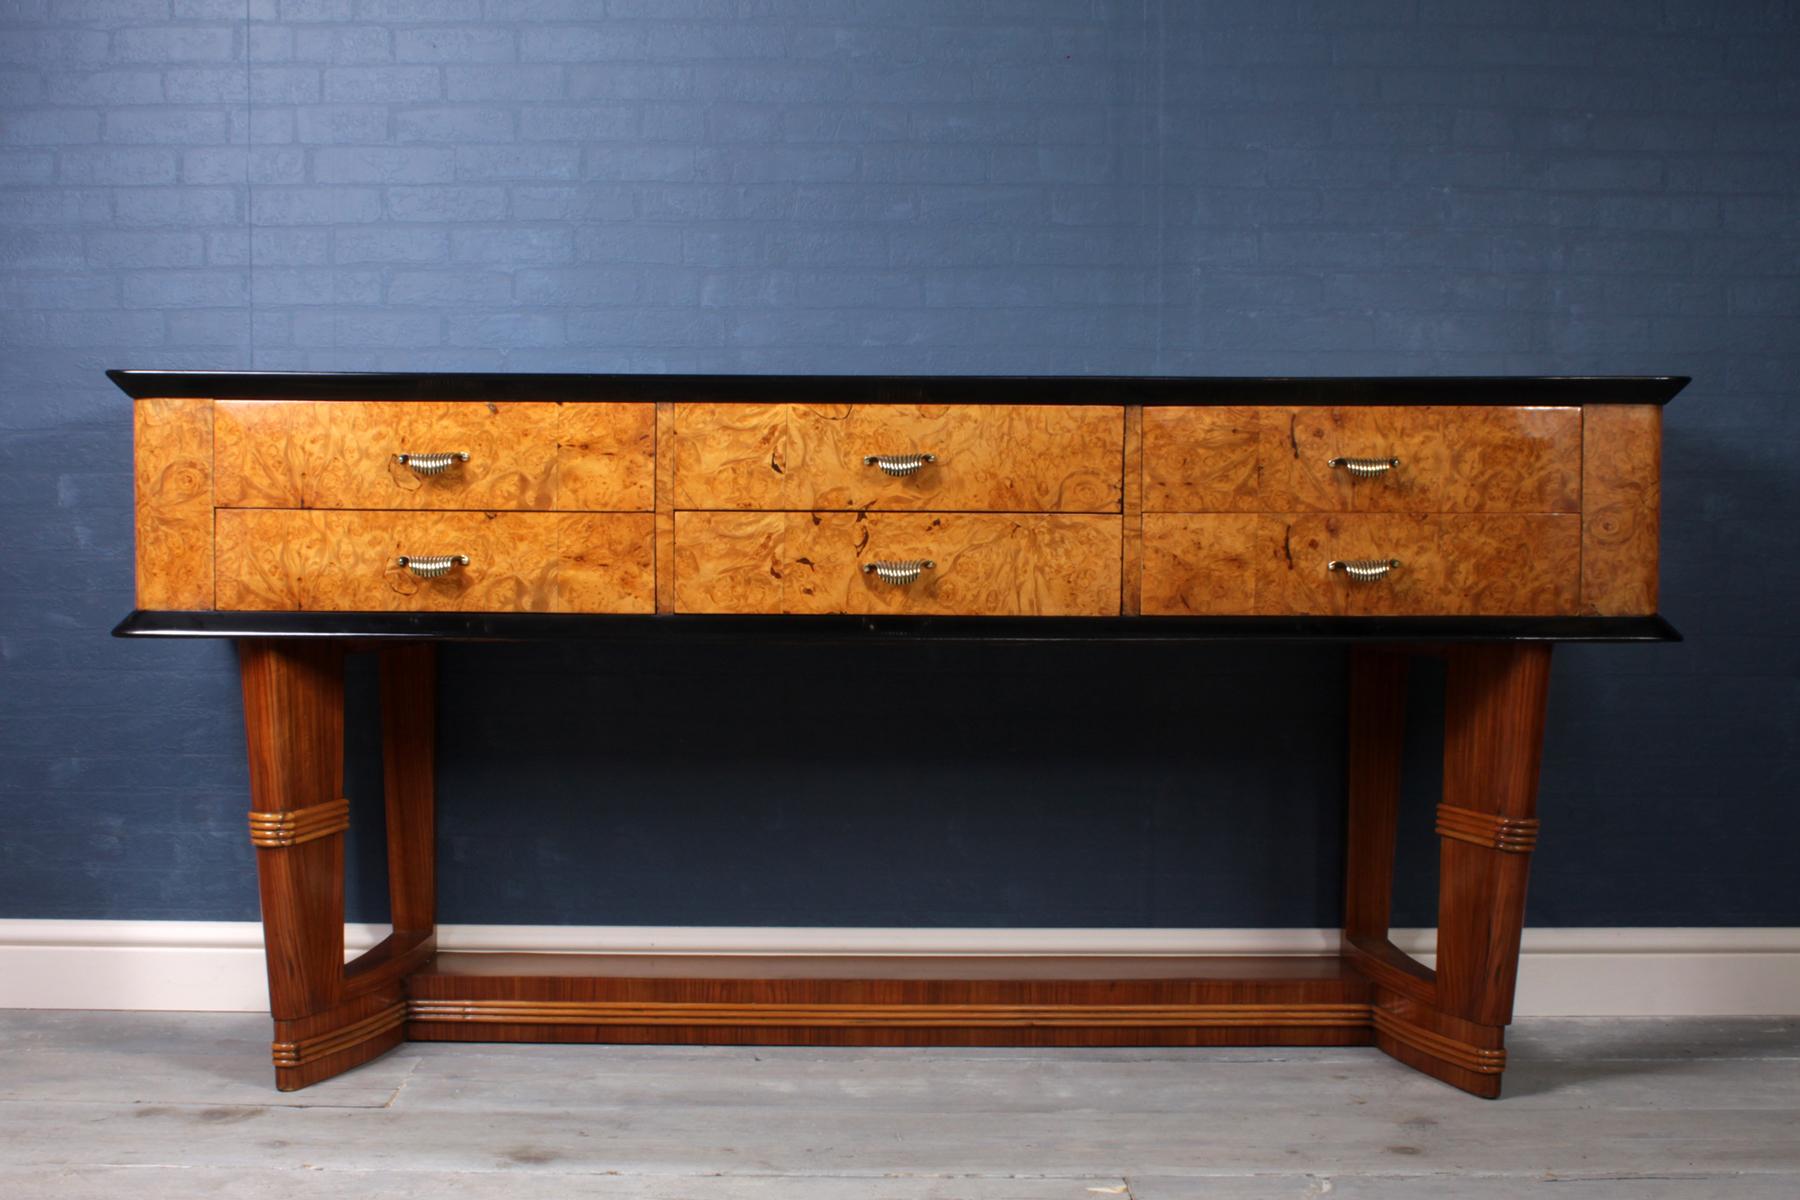 Midcentury Italian console table in burr maple.

A 1950s Italian six-drawer console table in burr maple and walnut with black glass top and brass handles the console has been professionally hand polished with a burnished luster finish, the console